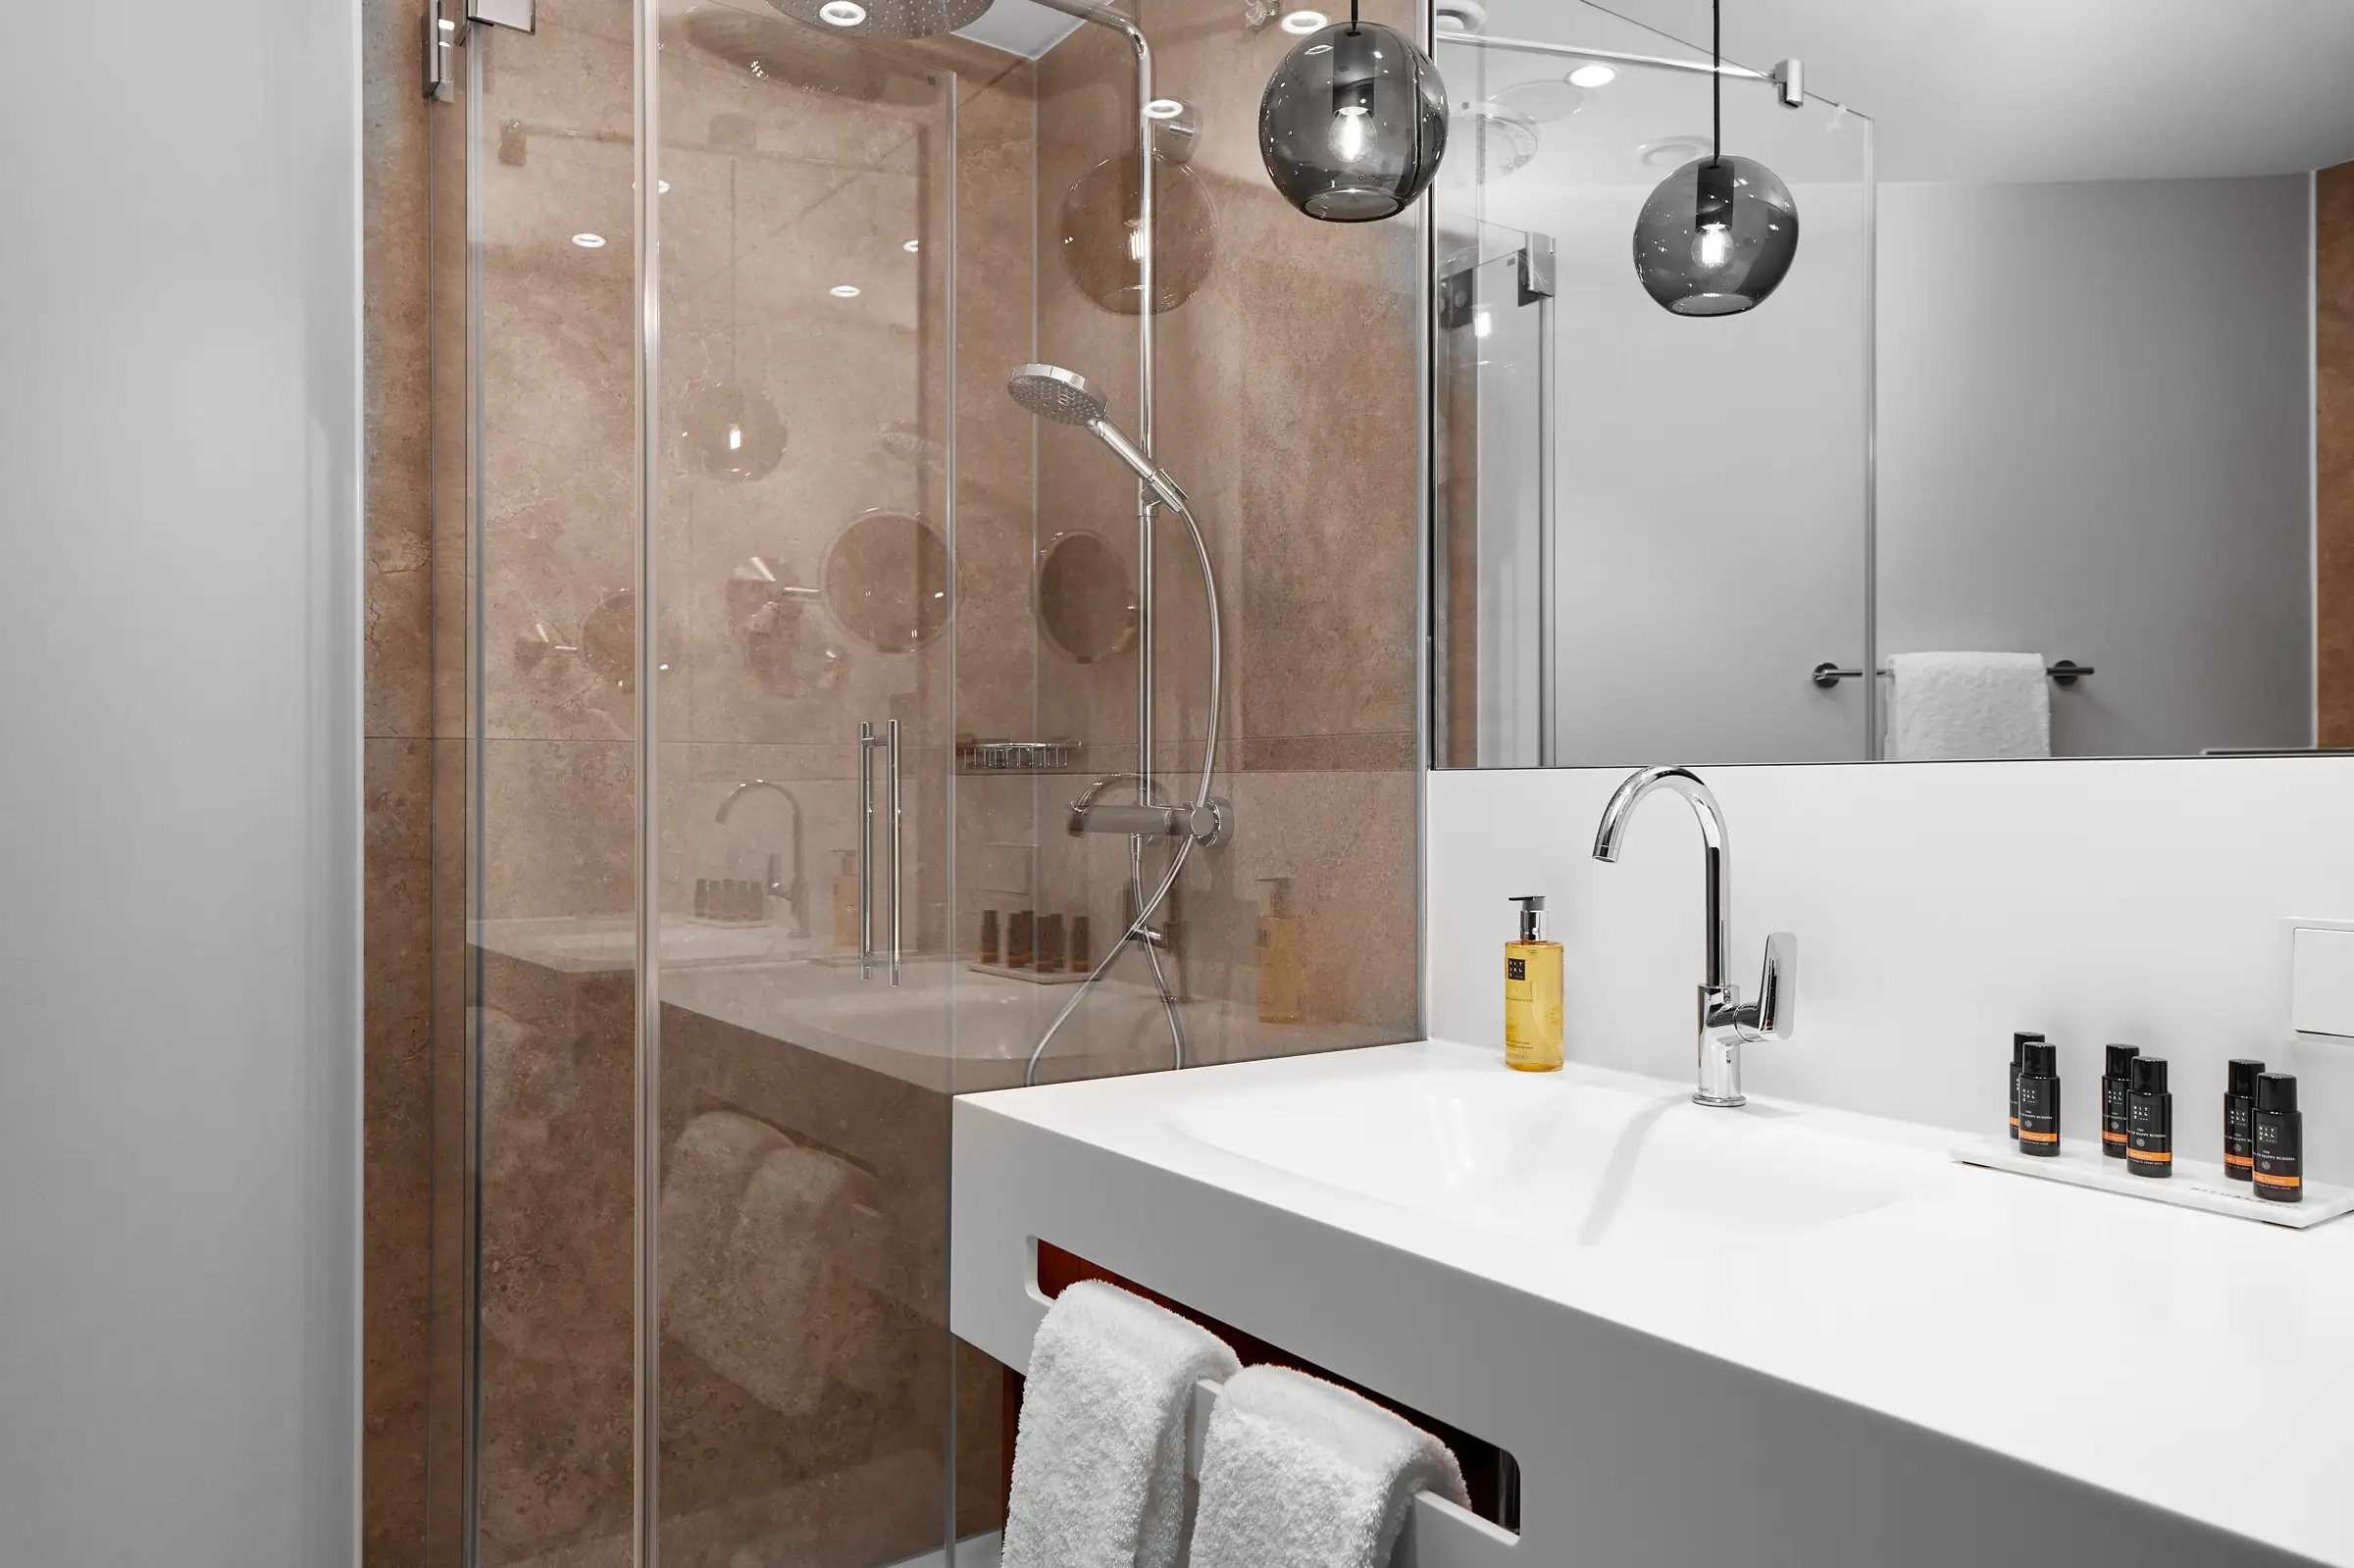 Bathroom at the Business room - Hyperion Hotel München - Official website